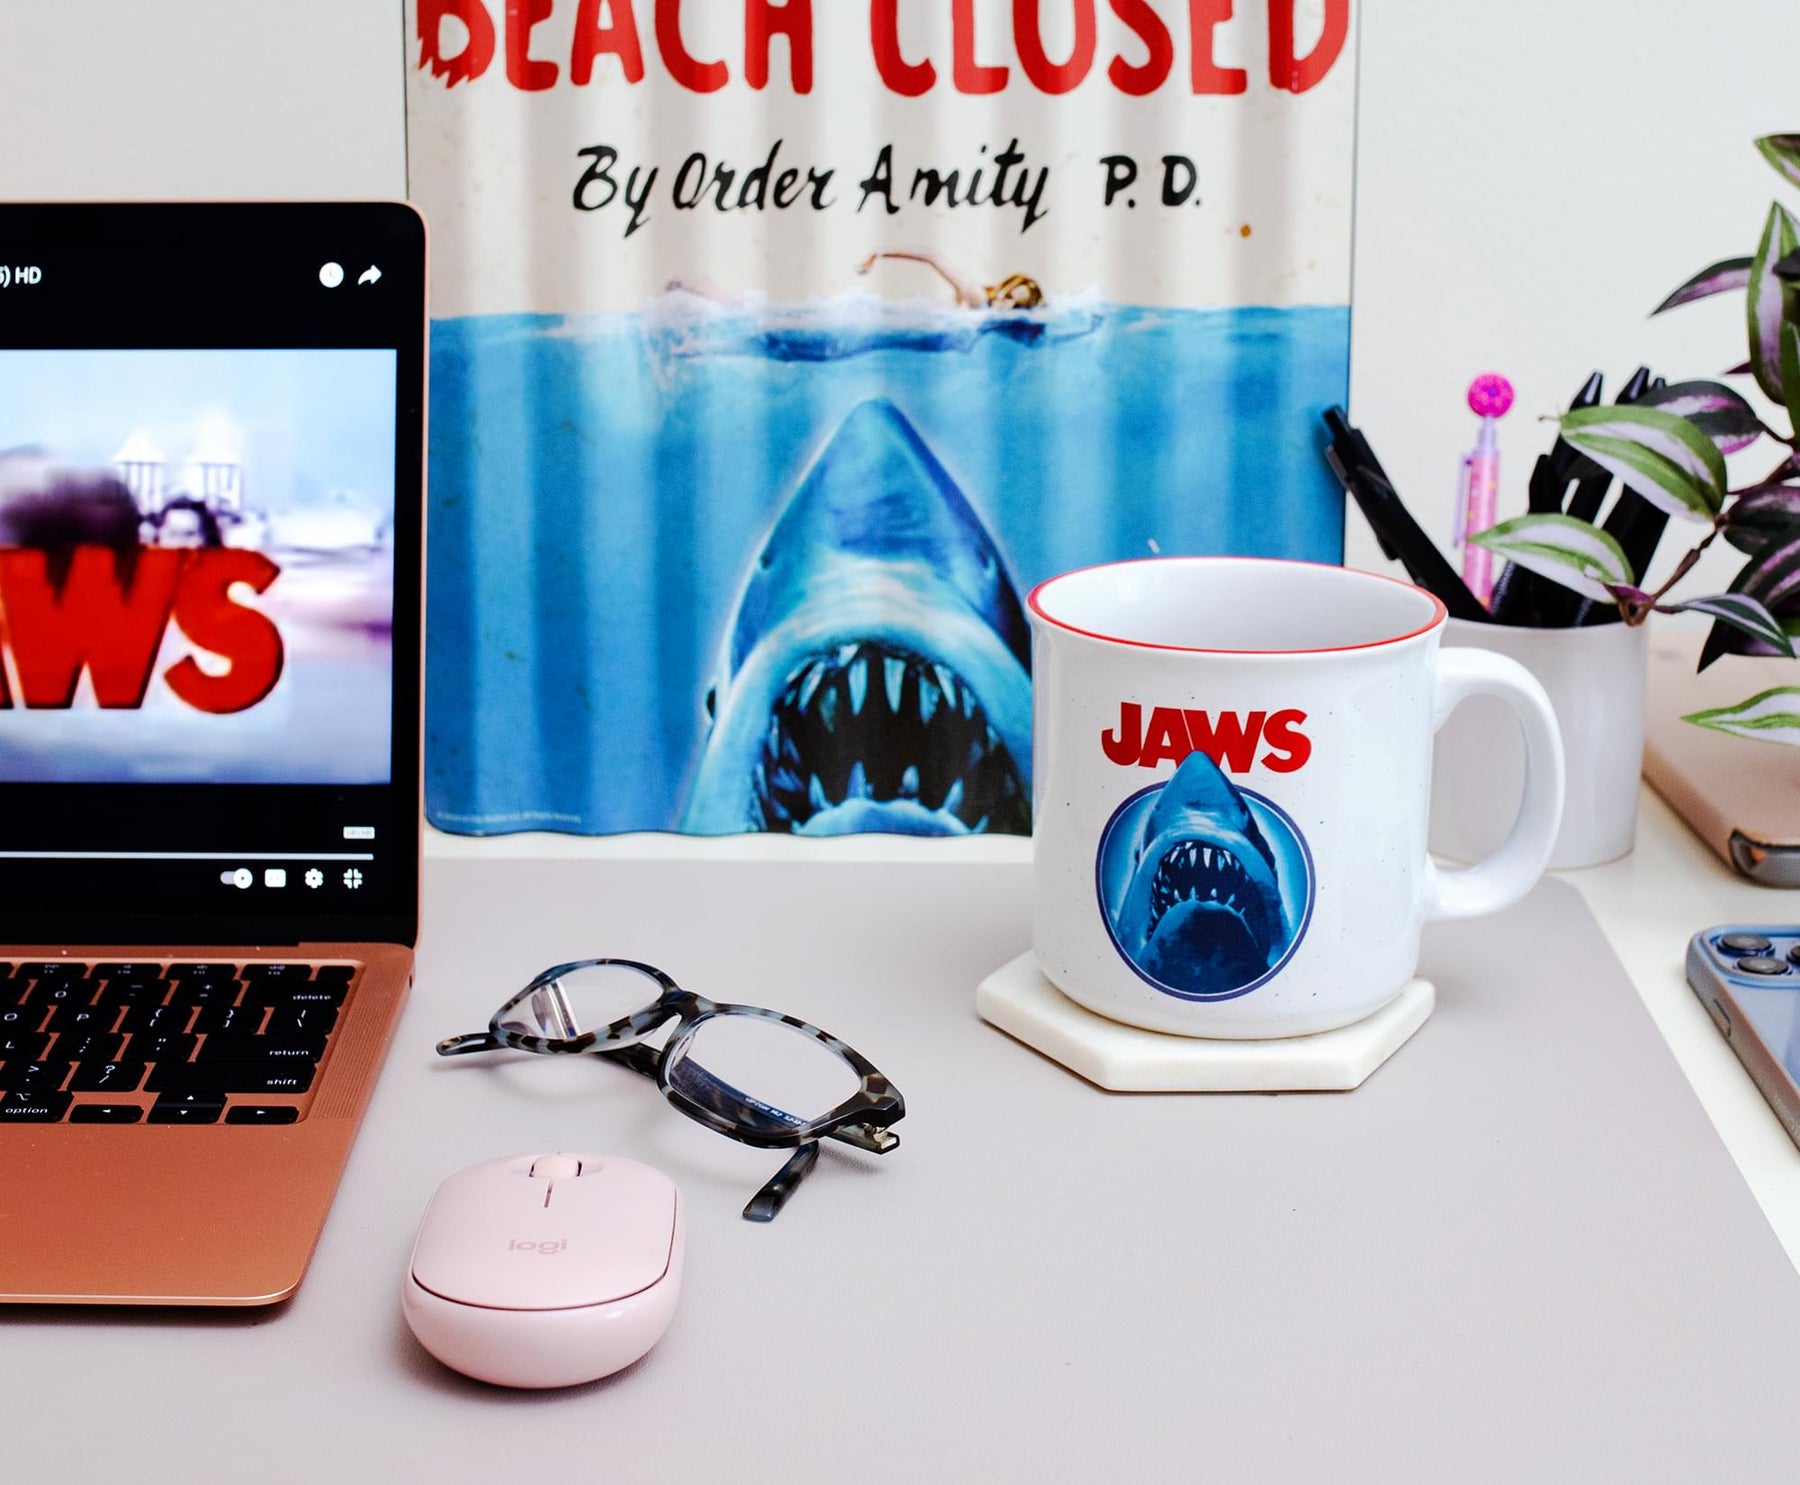 JAWS "You're Gonna Need A Bigger Boat" Ceramic Camper Mug | Holds 20 Ounces